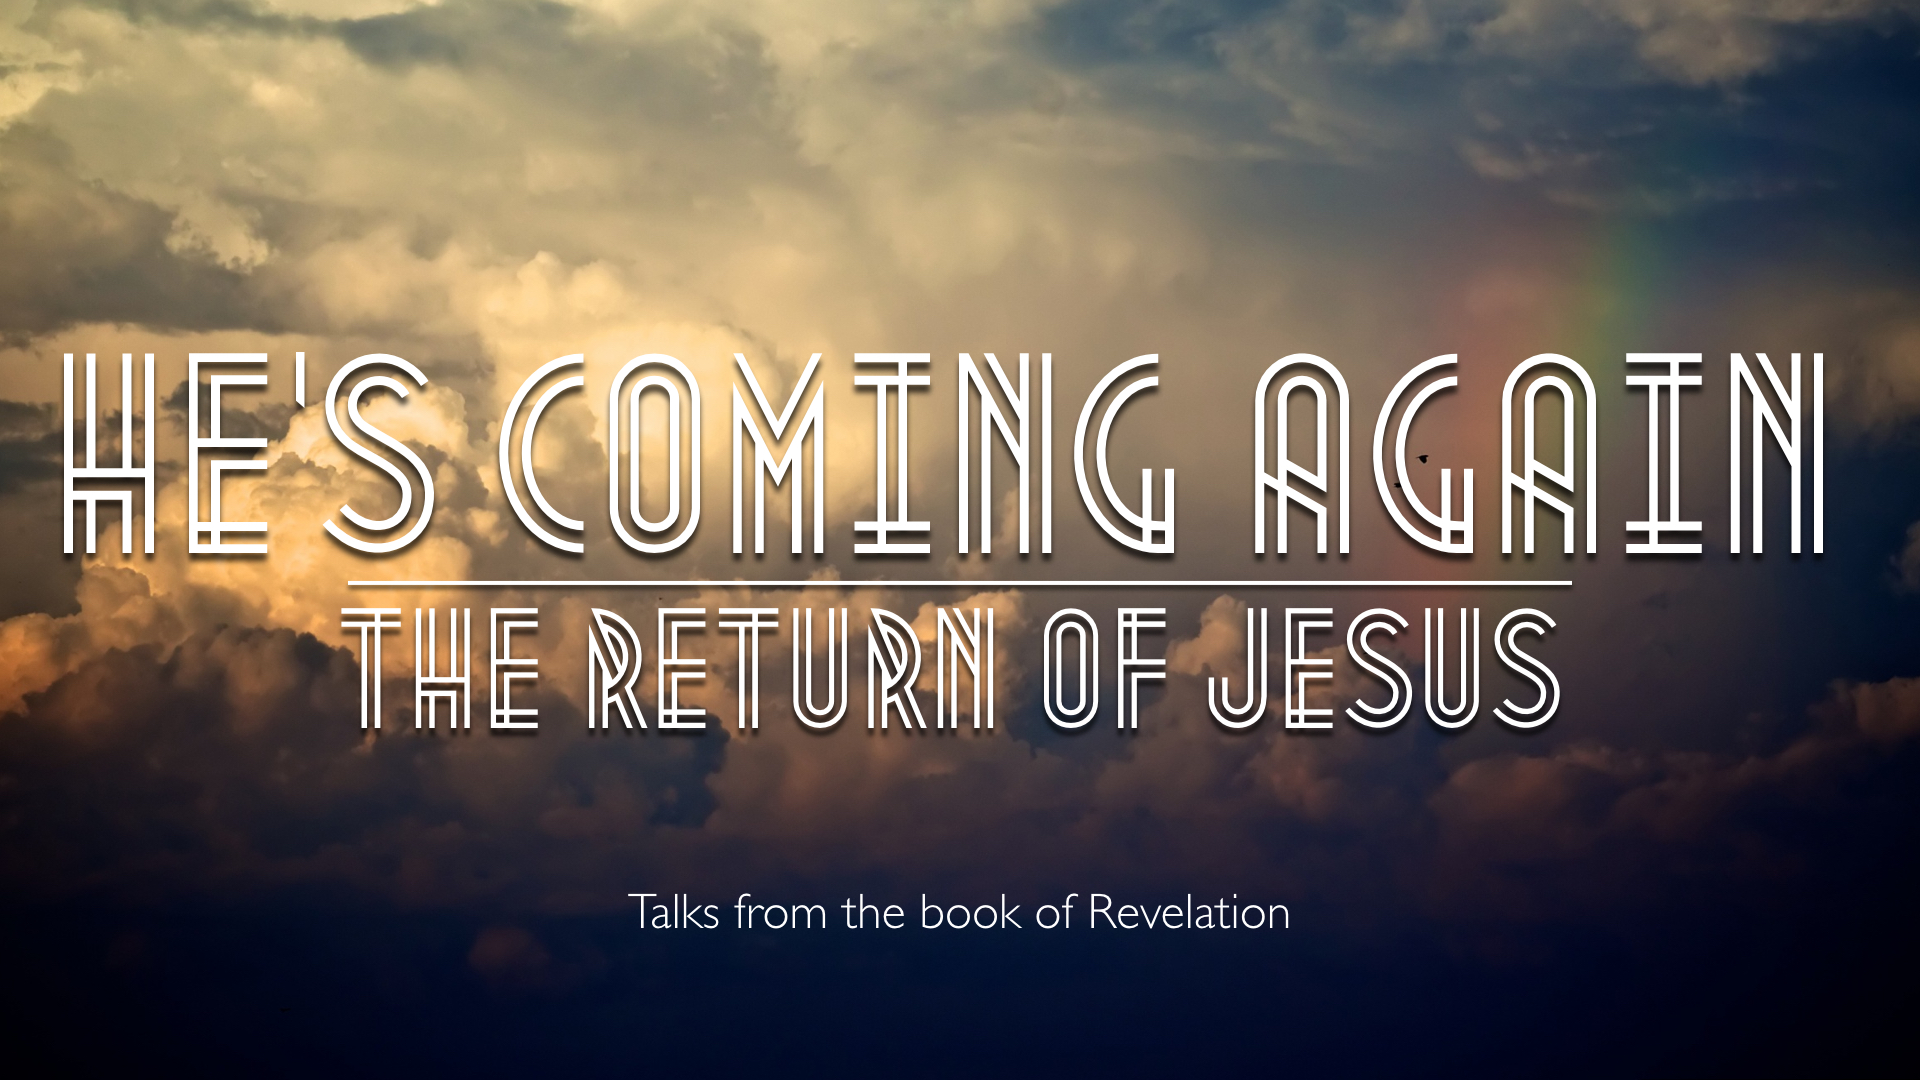 He is coming again banner